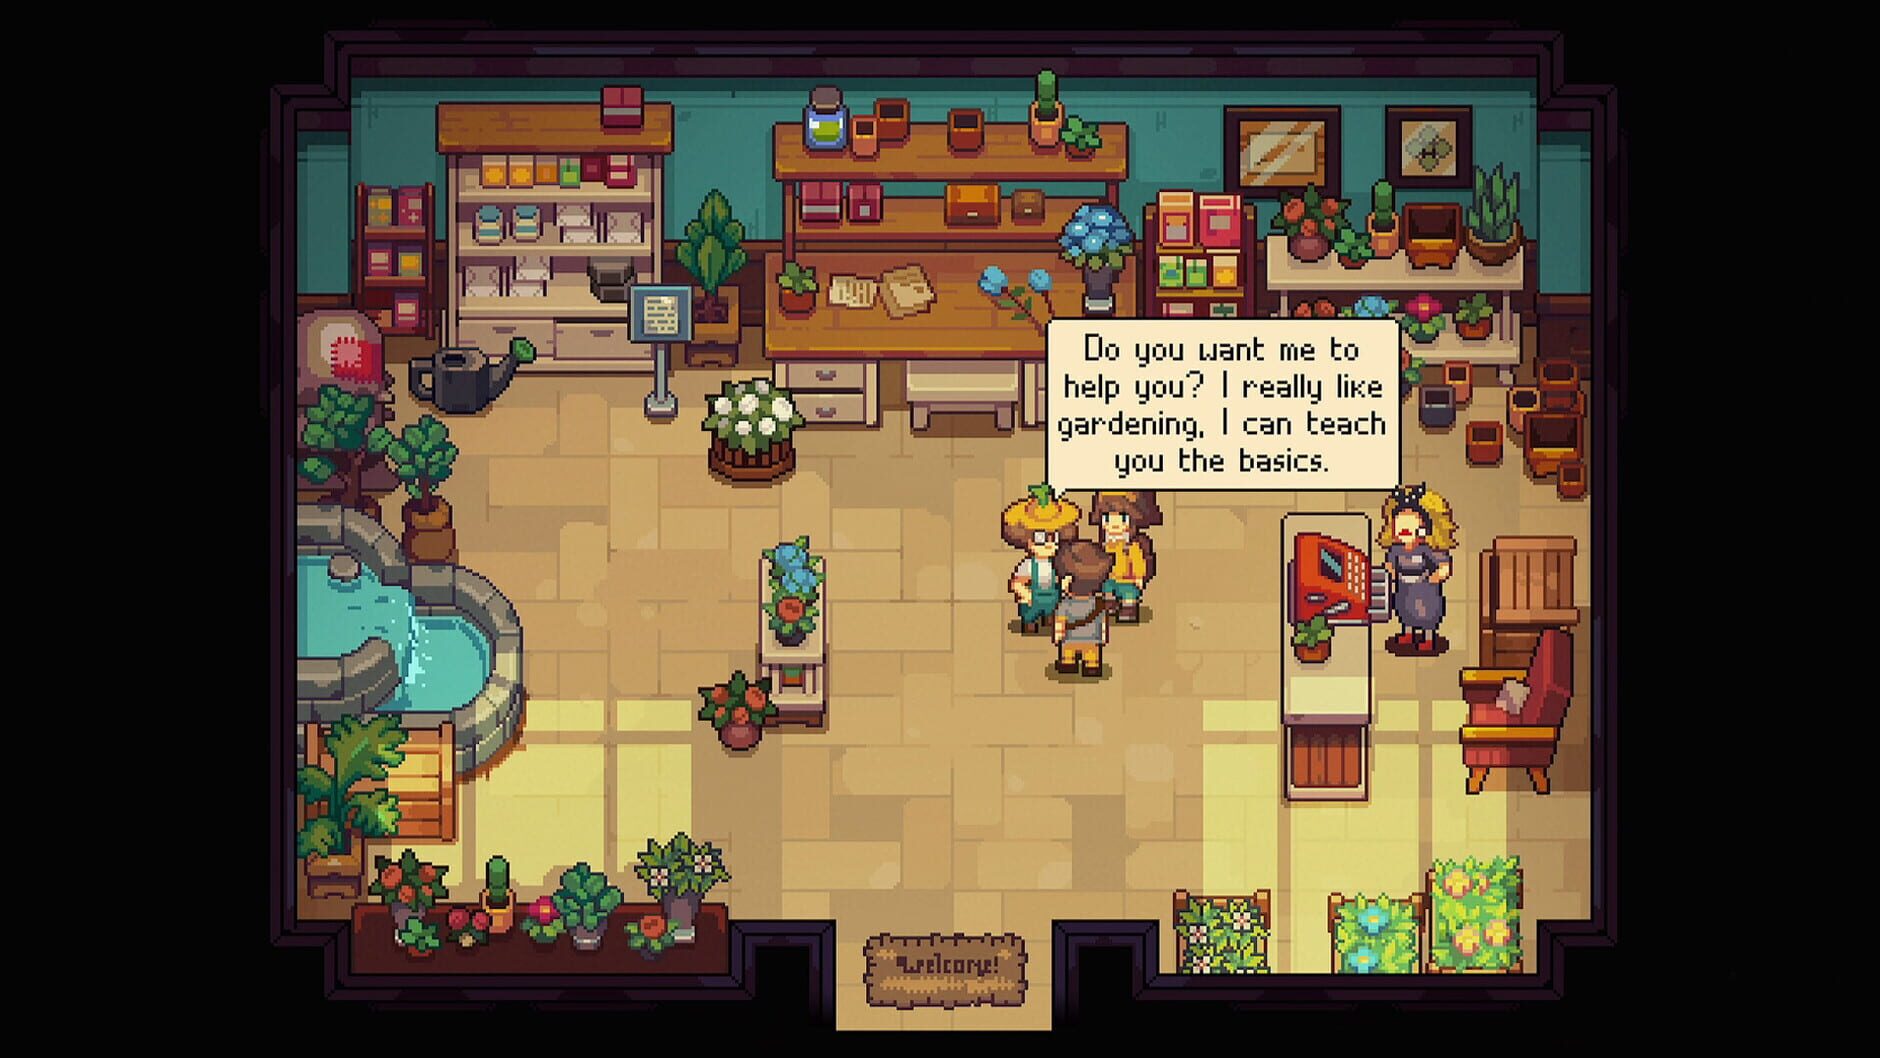 Screenshot for Bloomtown: A Different Story